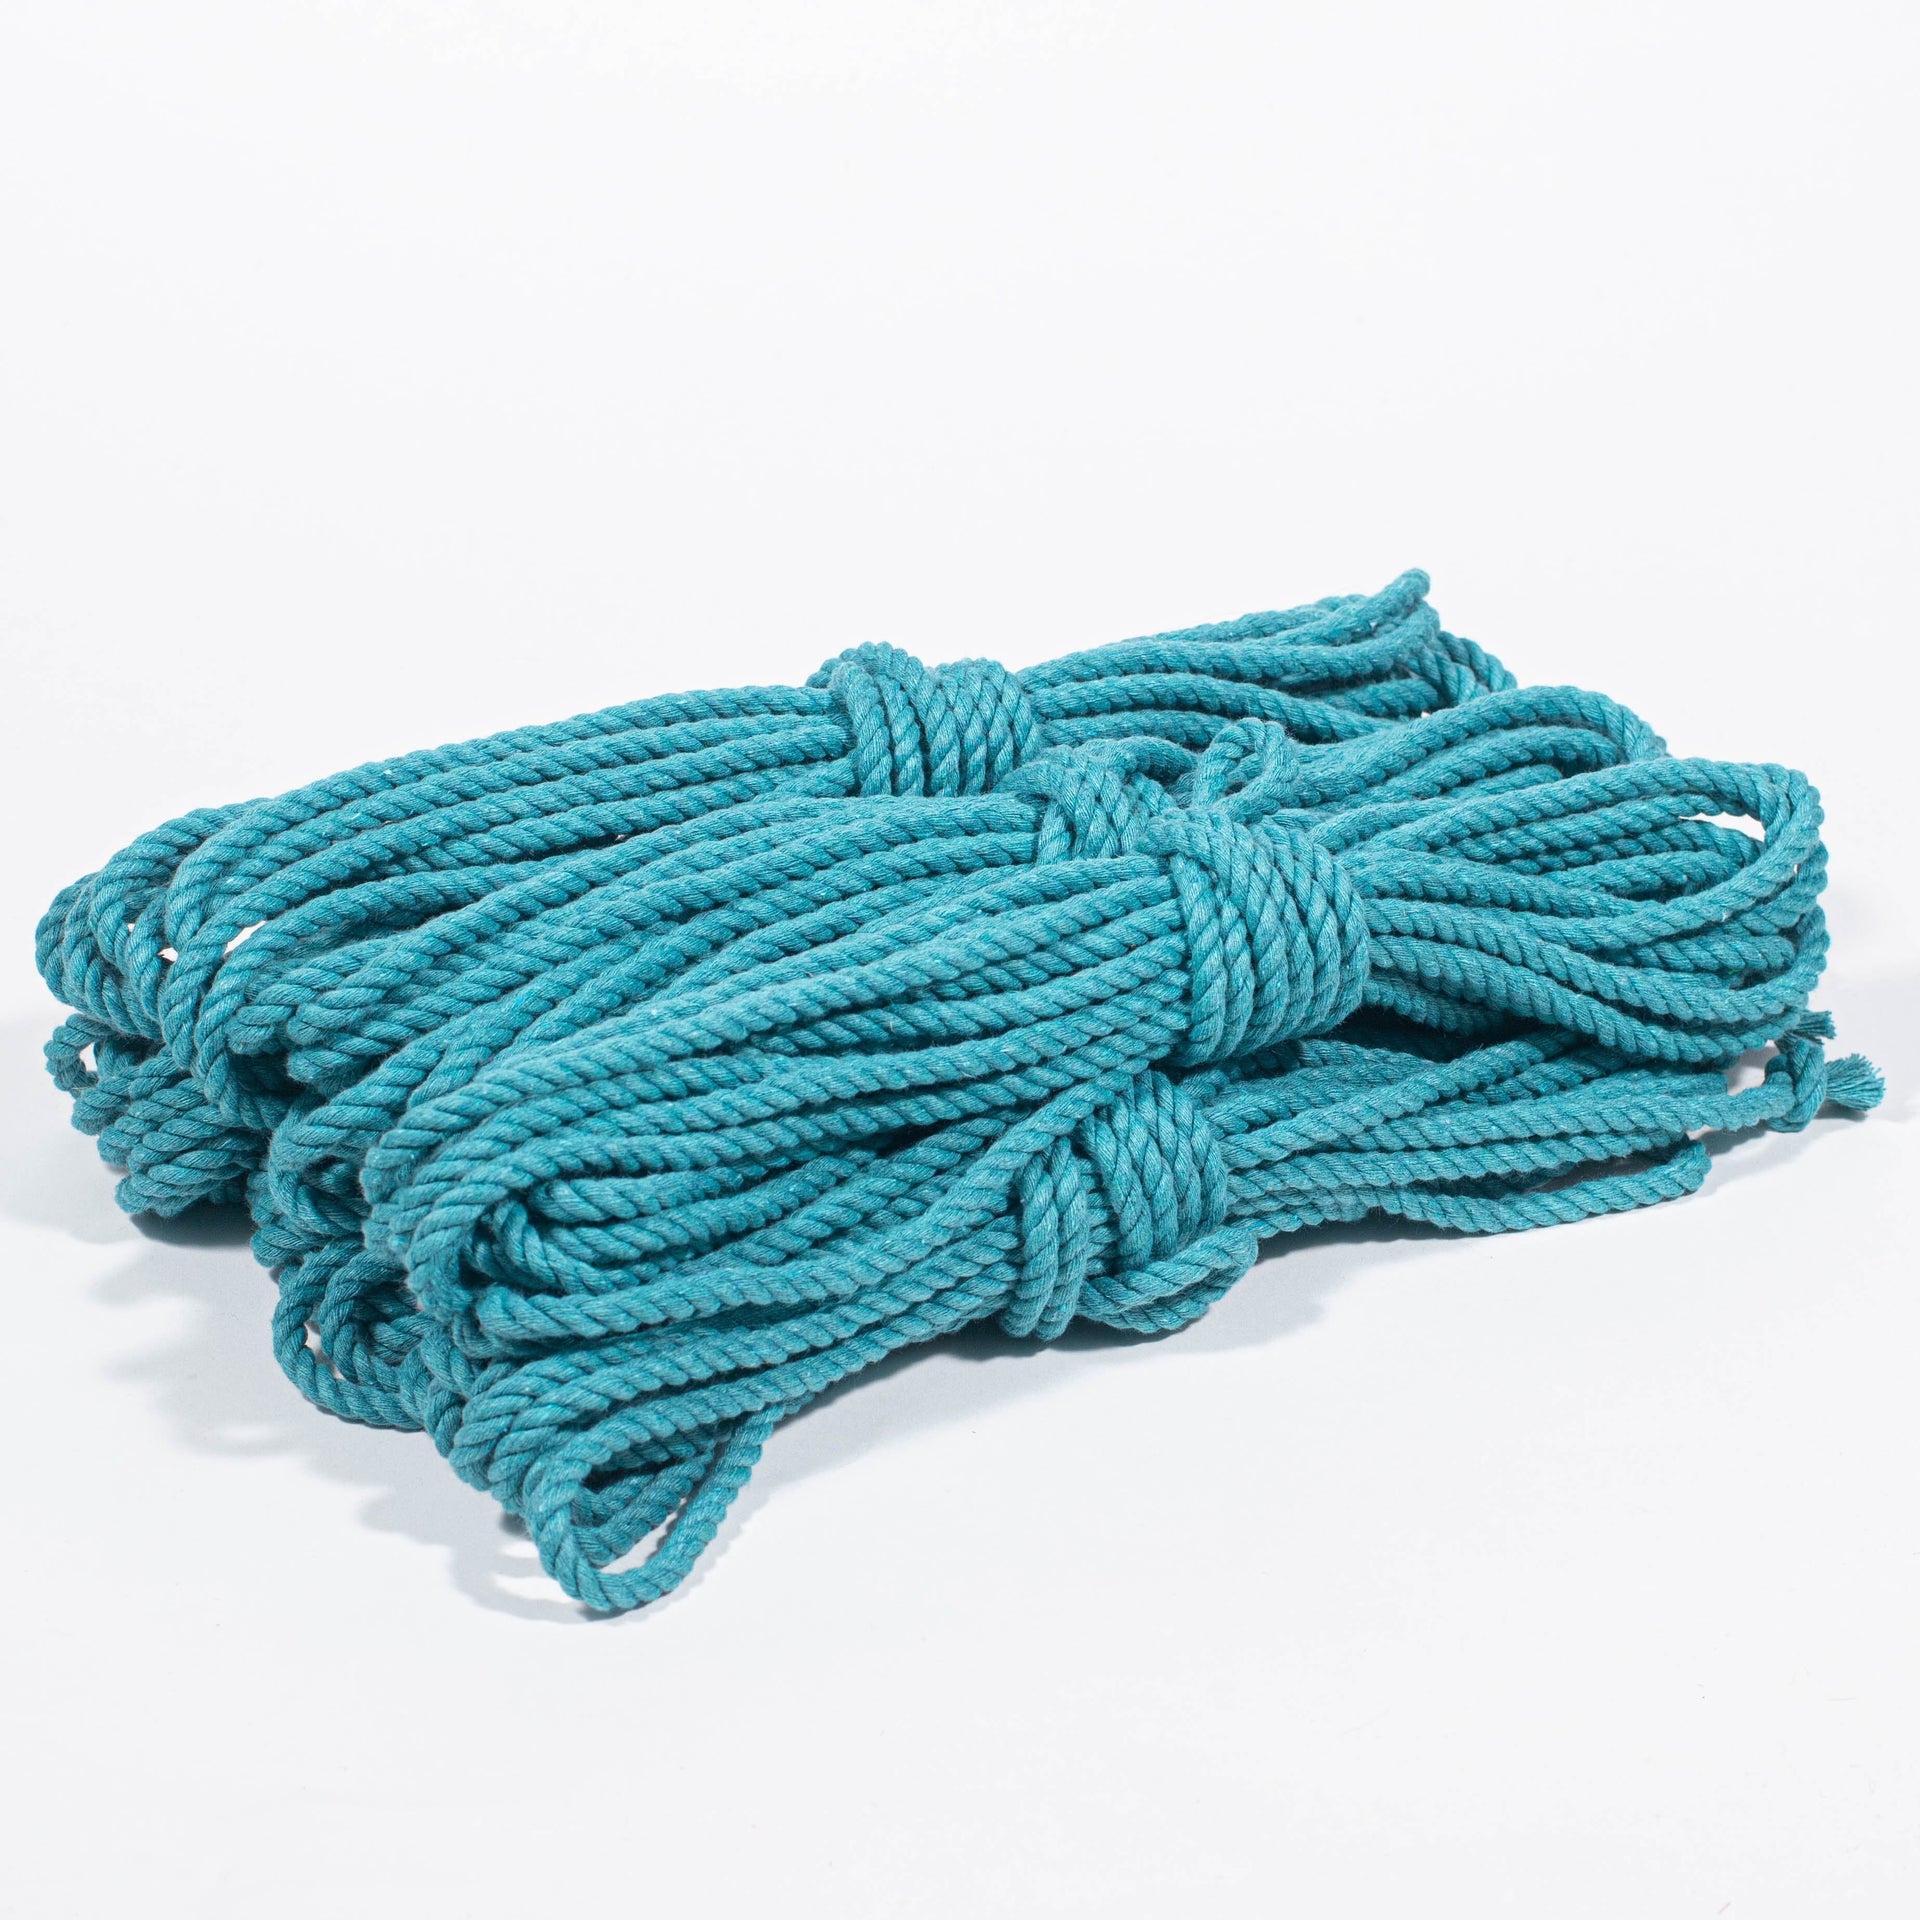 Cotton or jute for shibari? 4 key differences to help you decide – Anatomie  Rope Shop